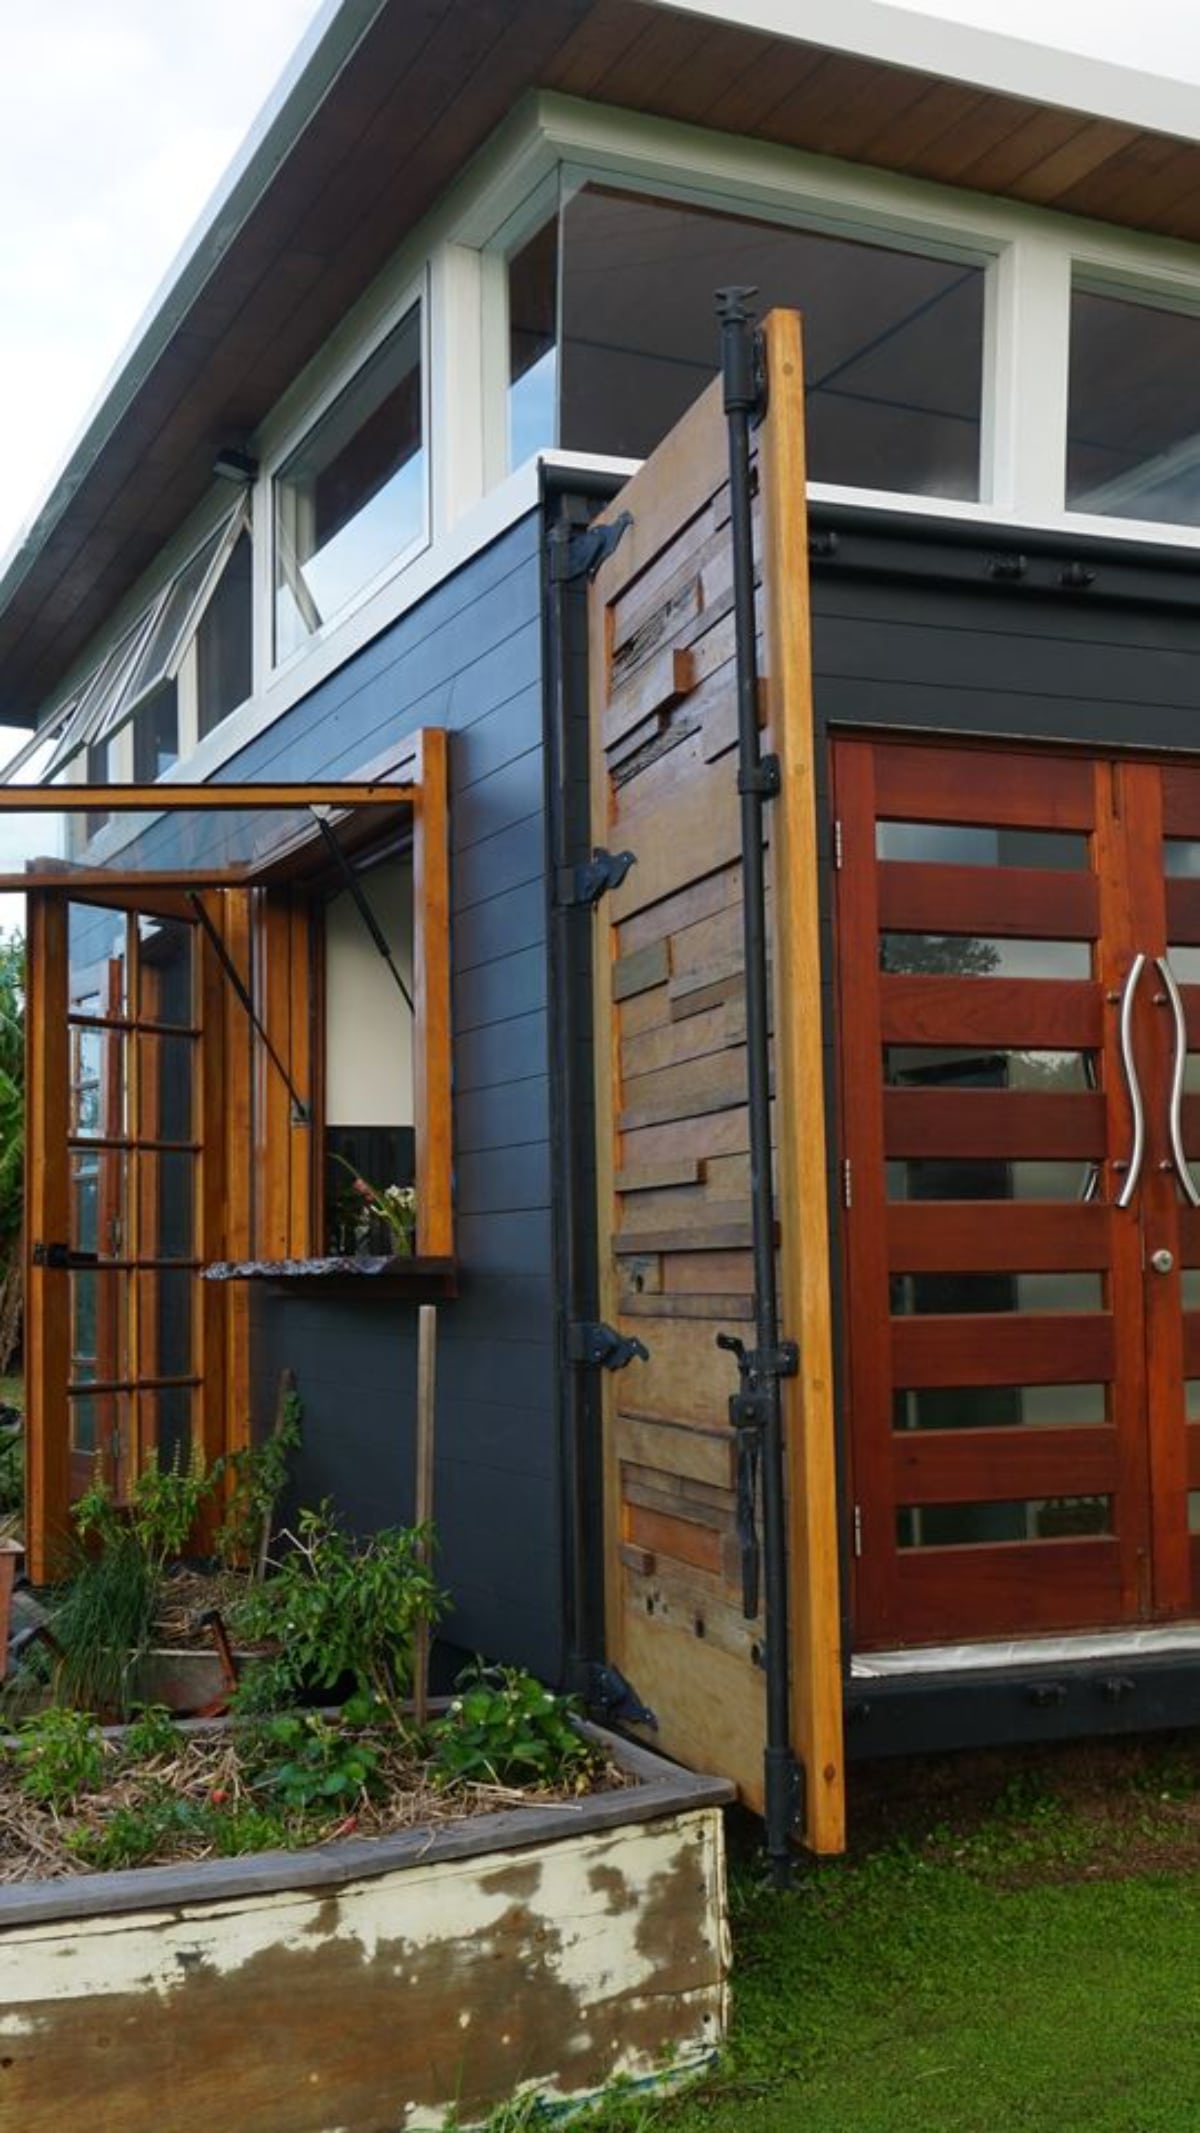 Wooden exterior and Side door view of Unique Tiny Home from container